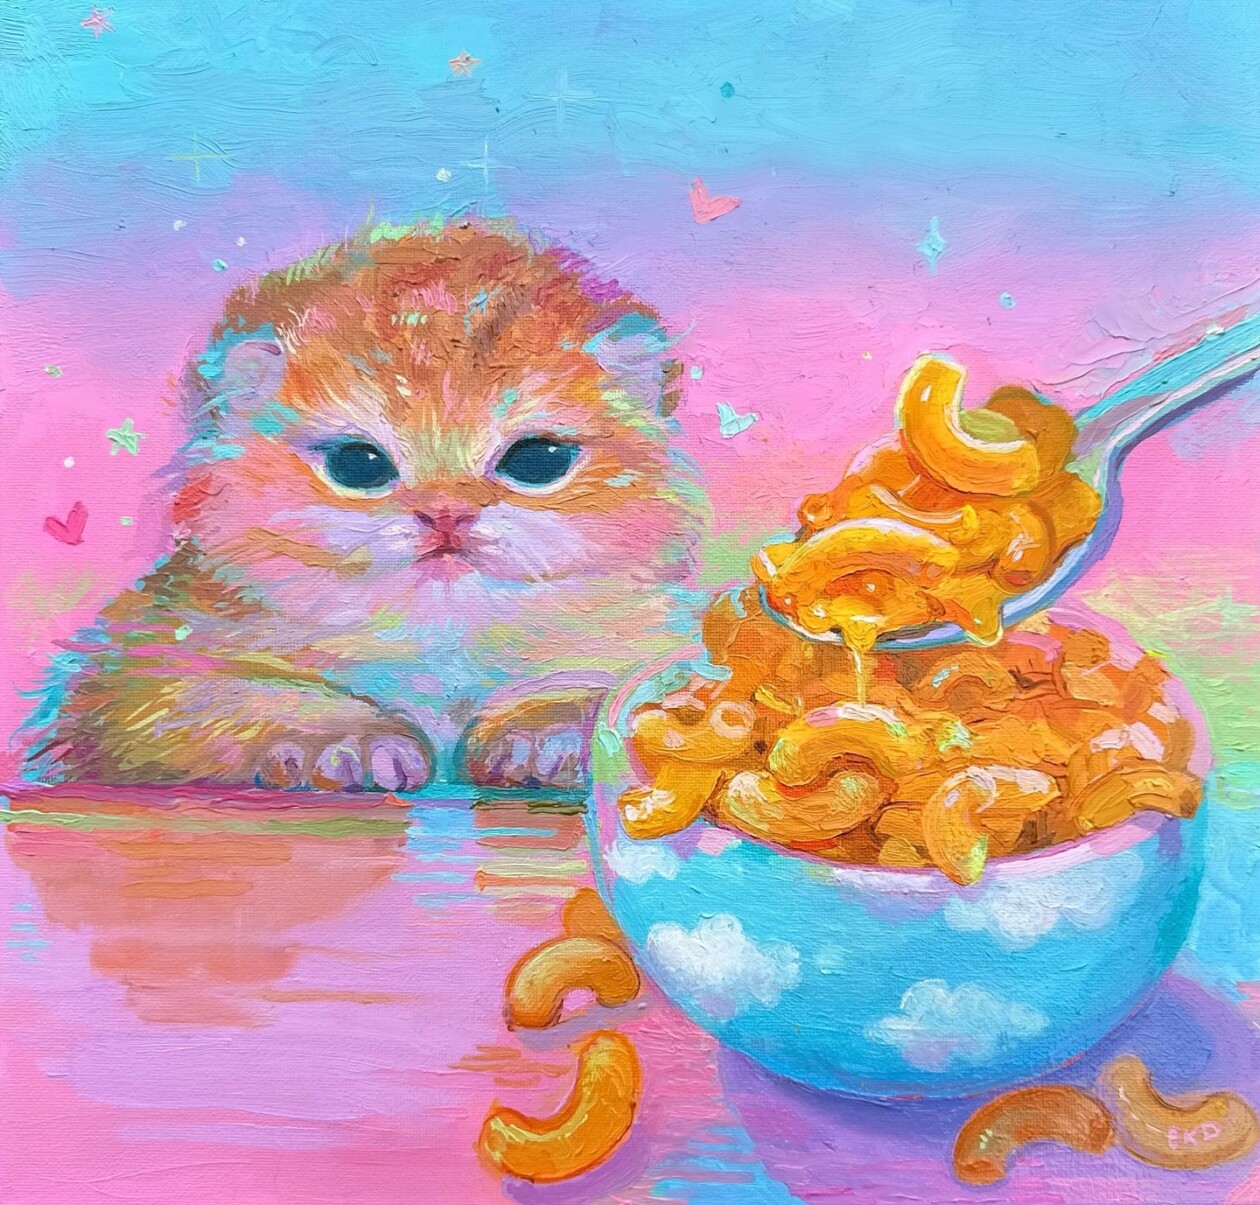 Cute And Lovely Oil And Acrylic Paintings Of Animals By Emily Dunlap (3)